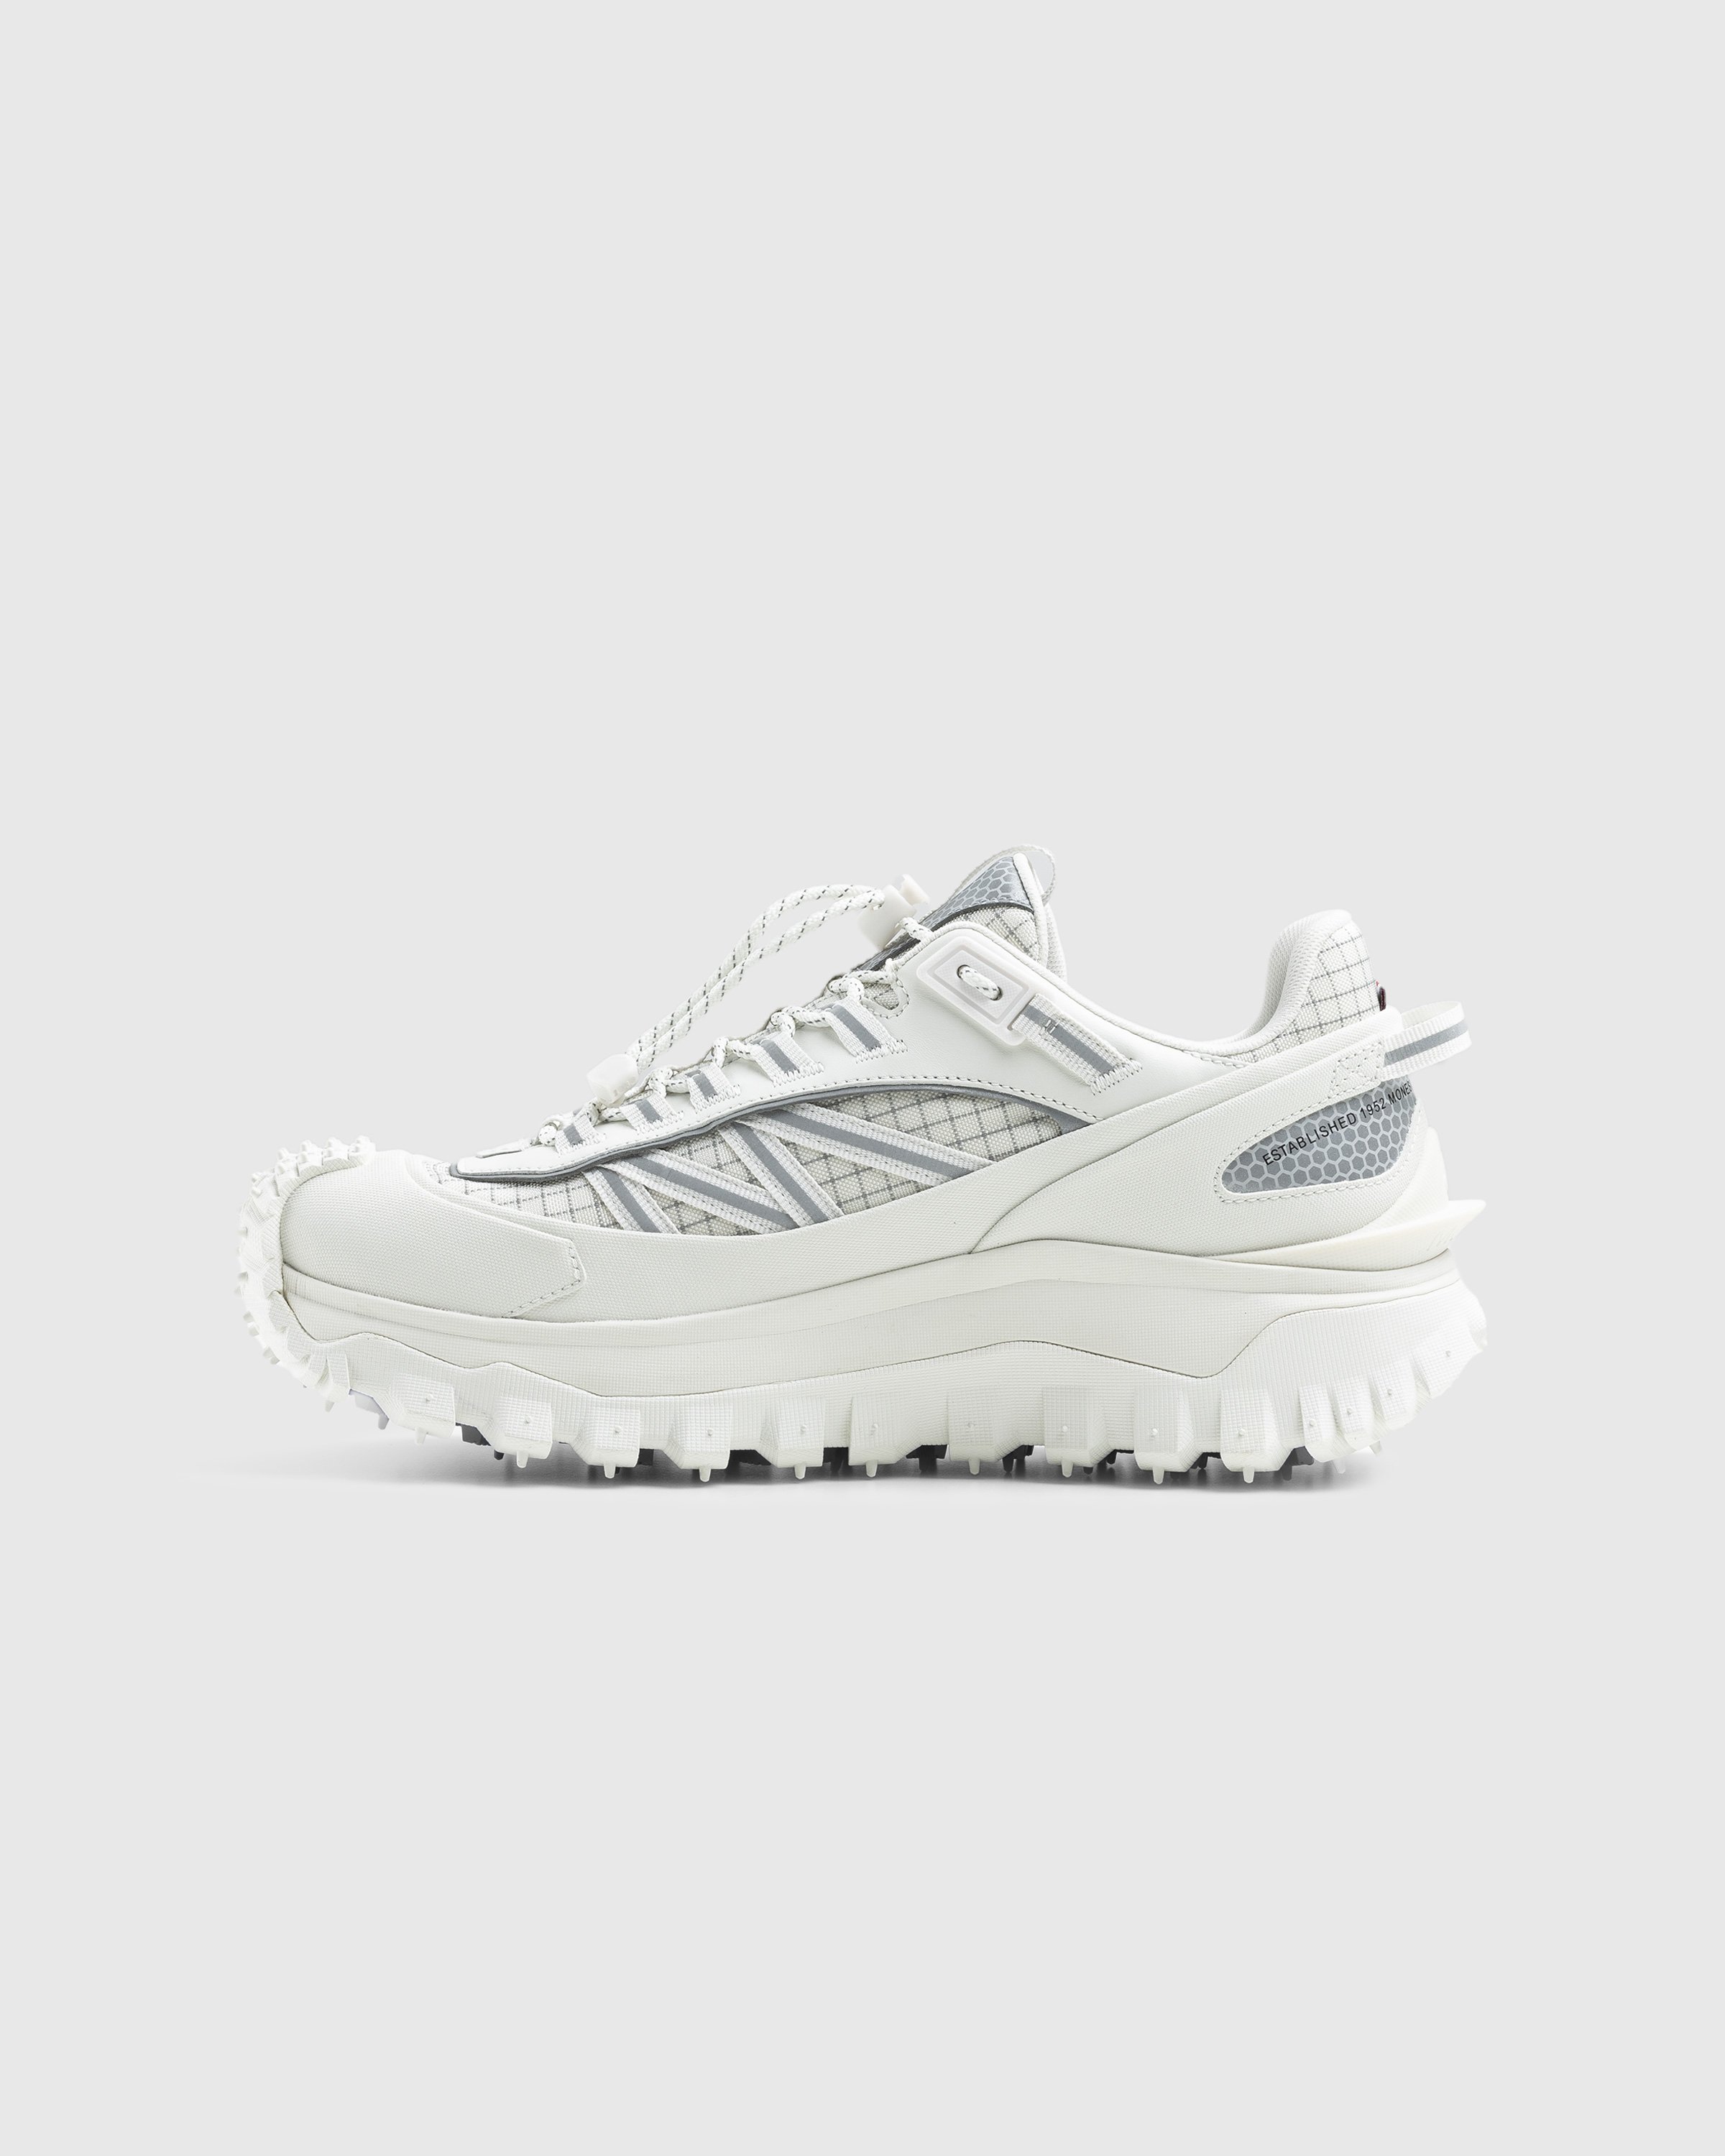 Moncler – Trailgrip Gtx Low Top Sneakers White | Highsnobiety Shop